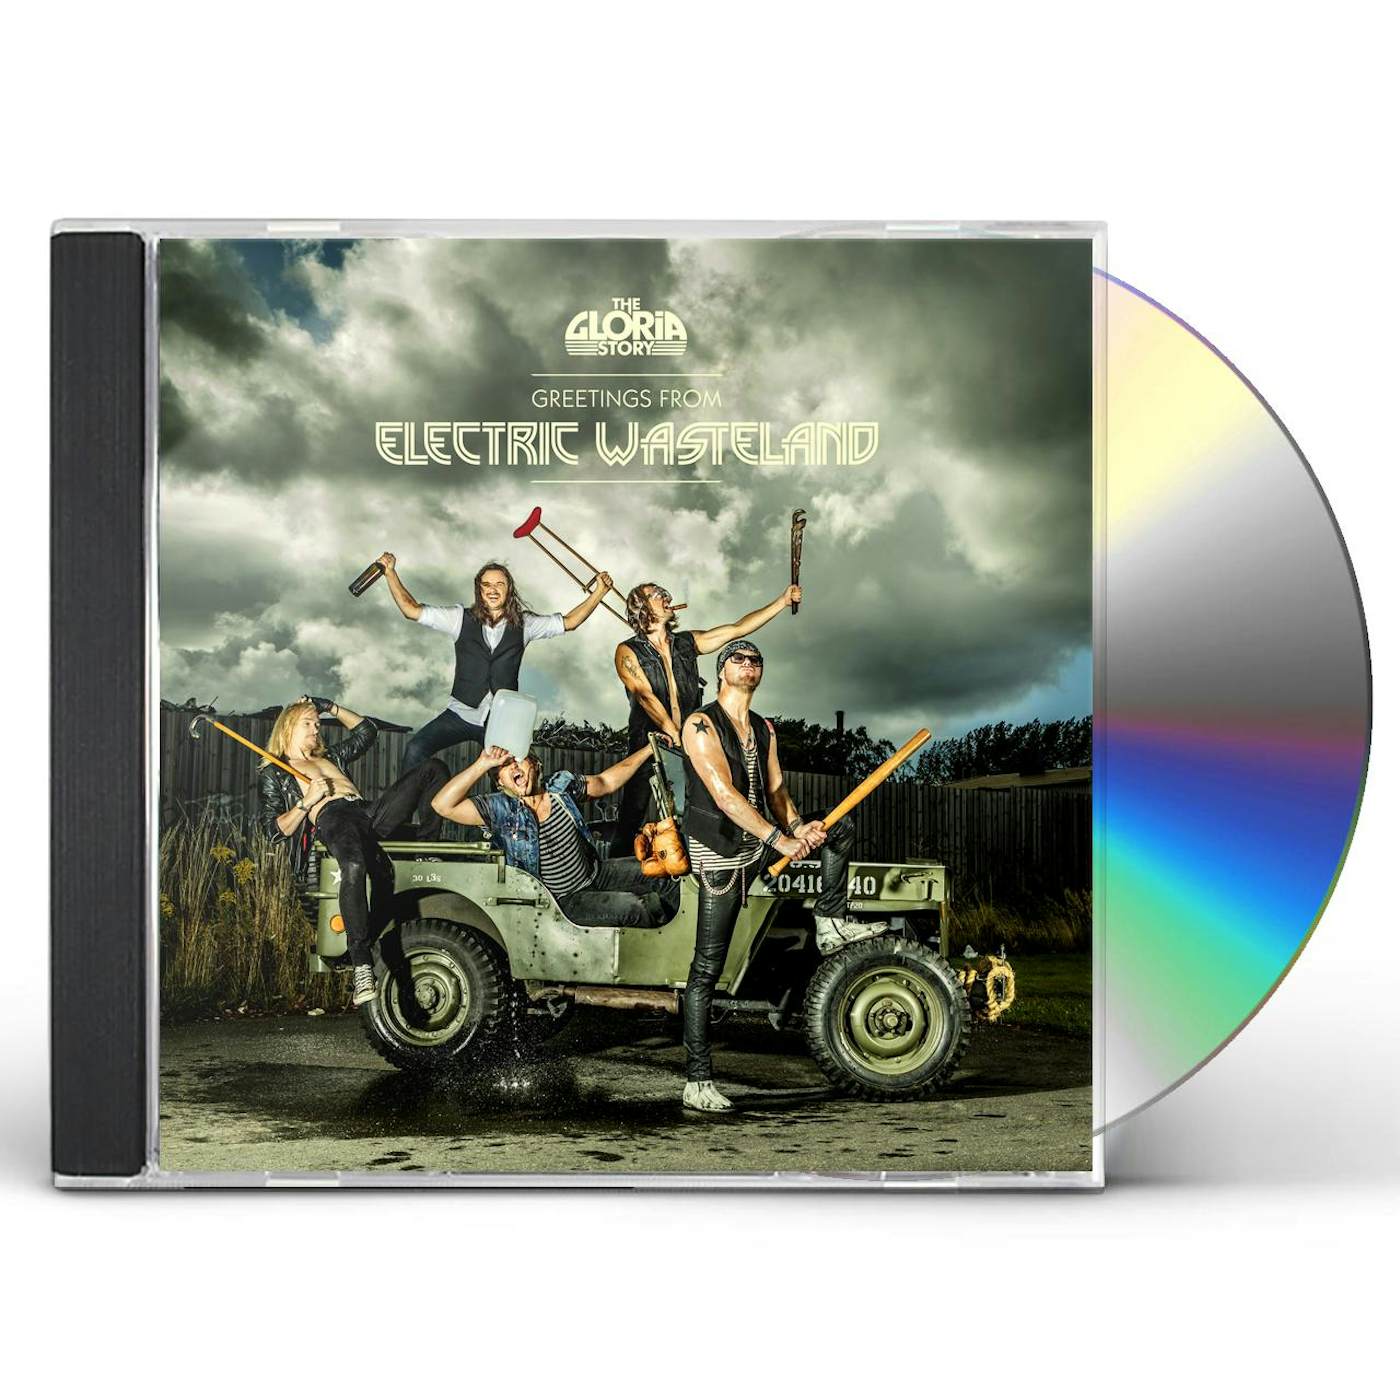 The Gloria Story GREETINGS FROM ELECTRIC WASTELANDS CD